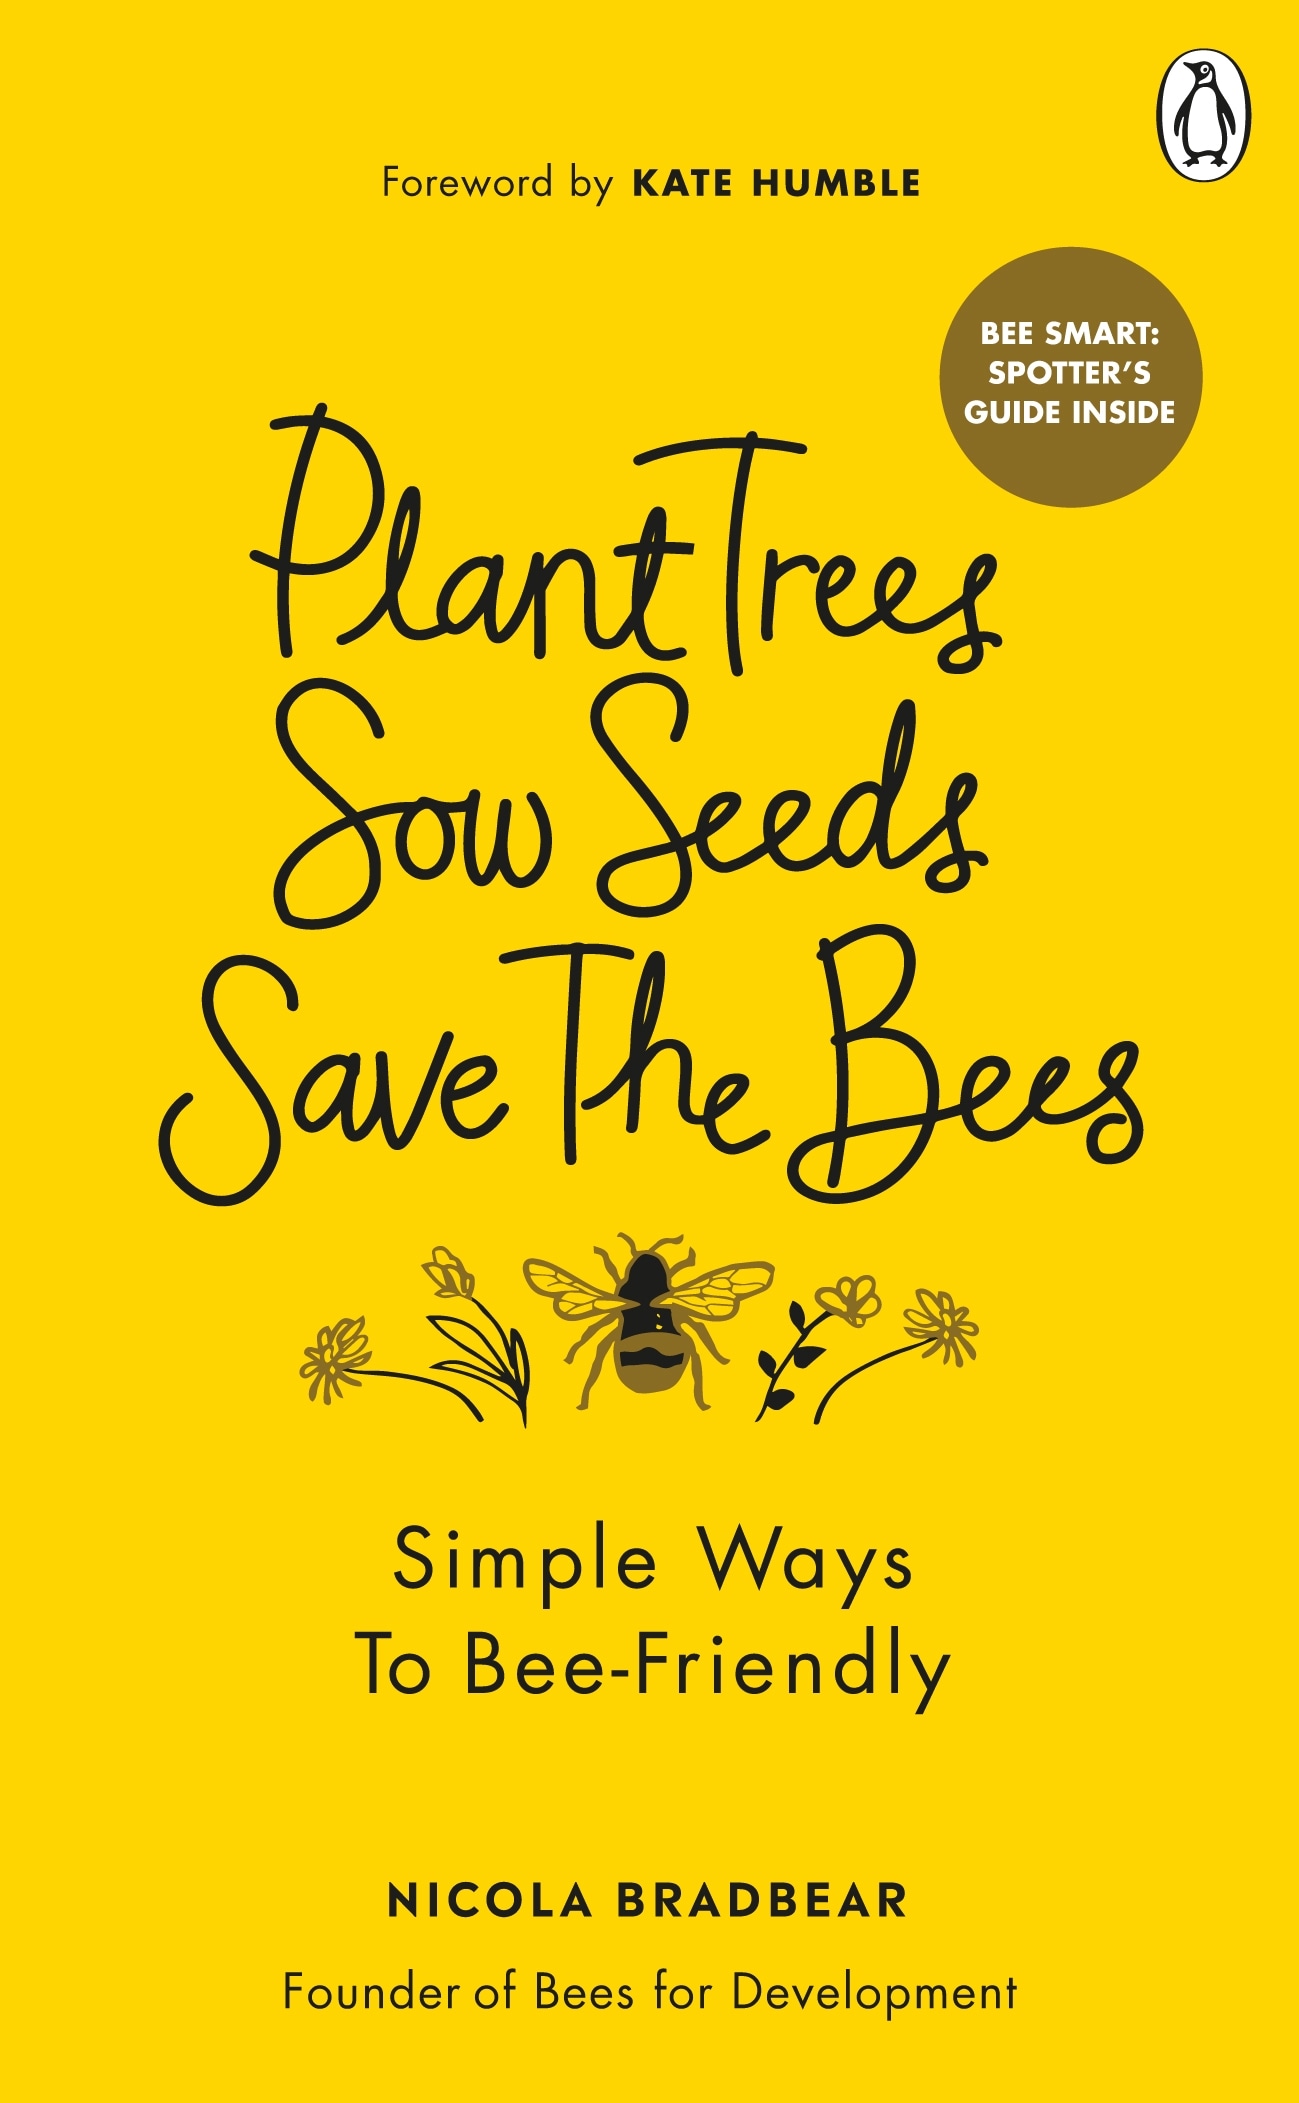 Book “Plant Trees, Sow Seeds, Save The Bees” by Nicola Bradbear — March 4, 2021